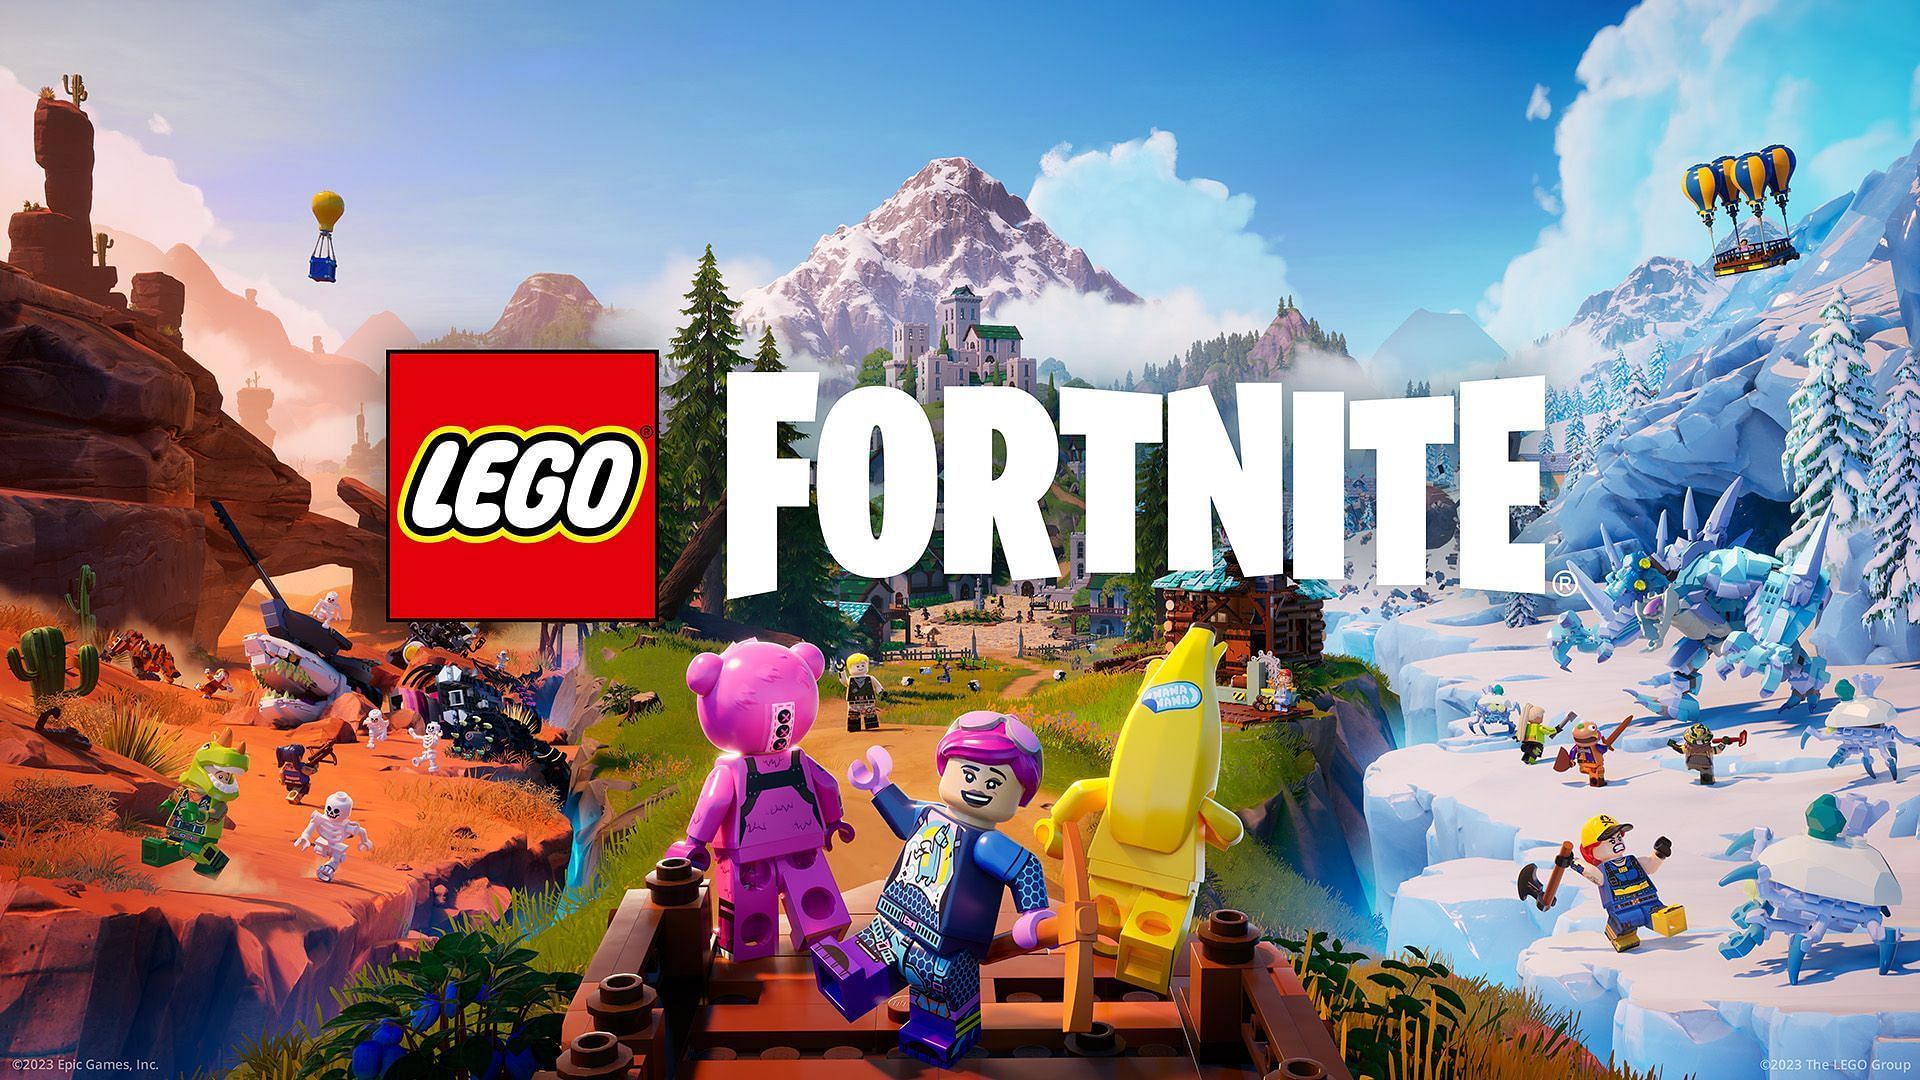 When is Fortnite LEGO coming out?